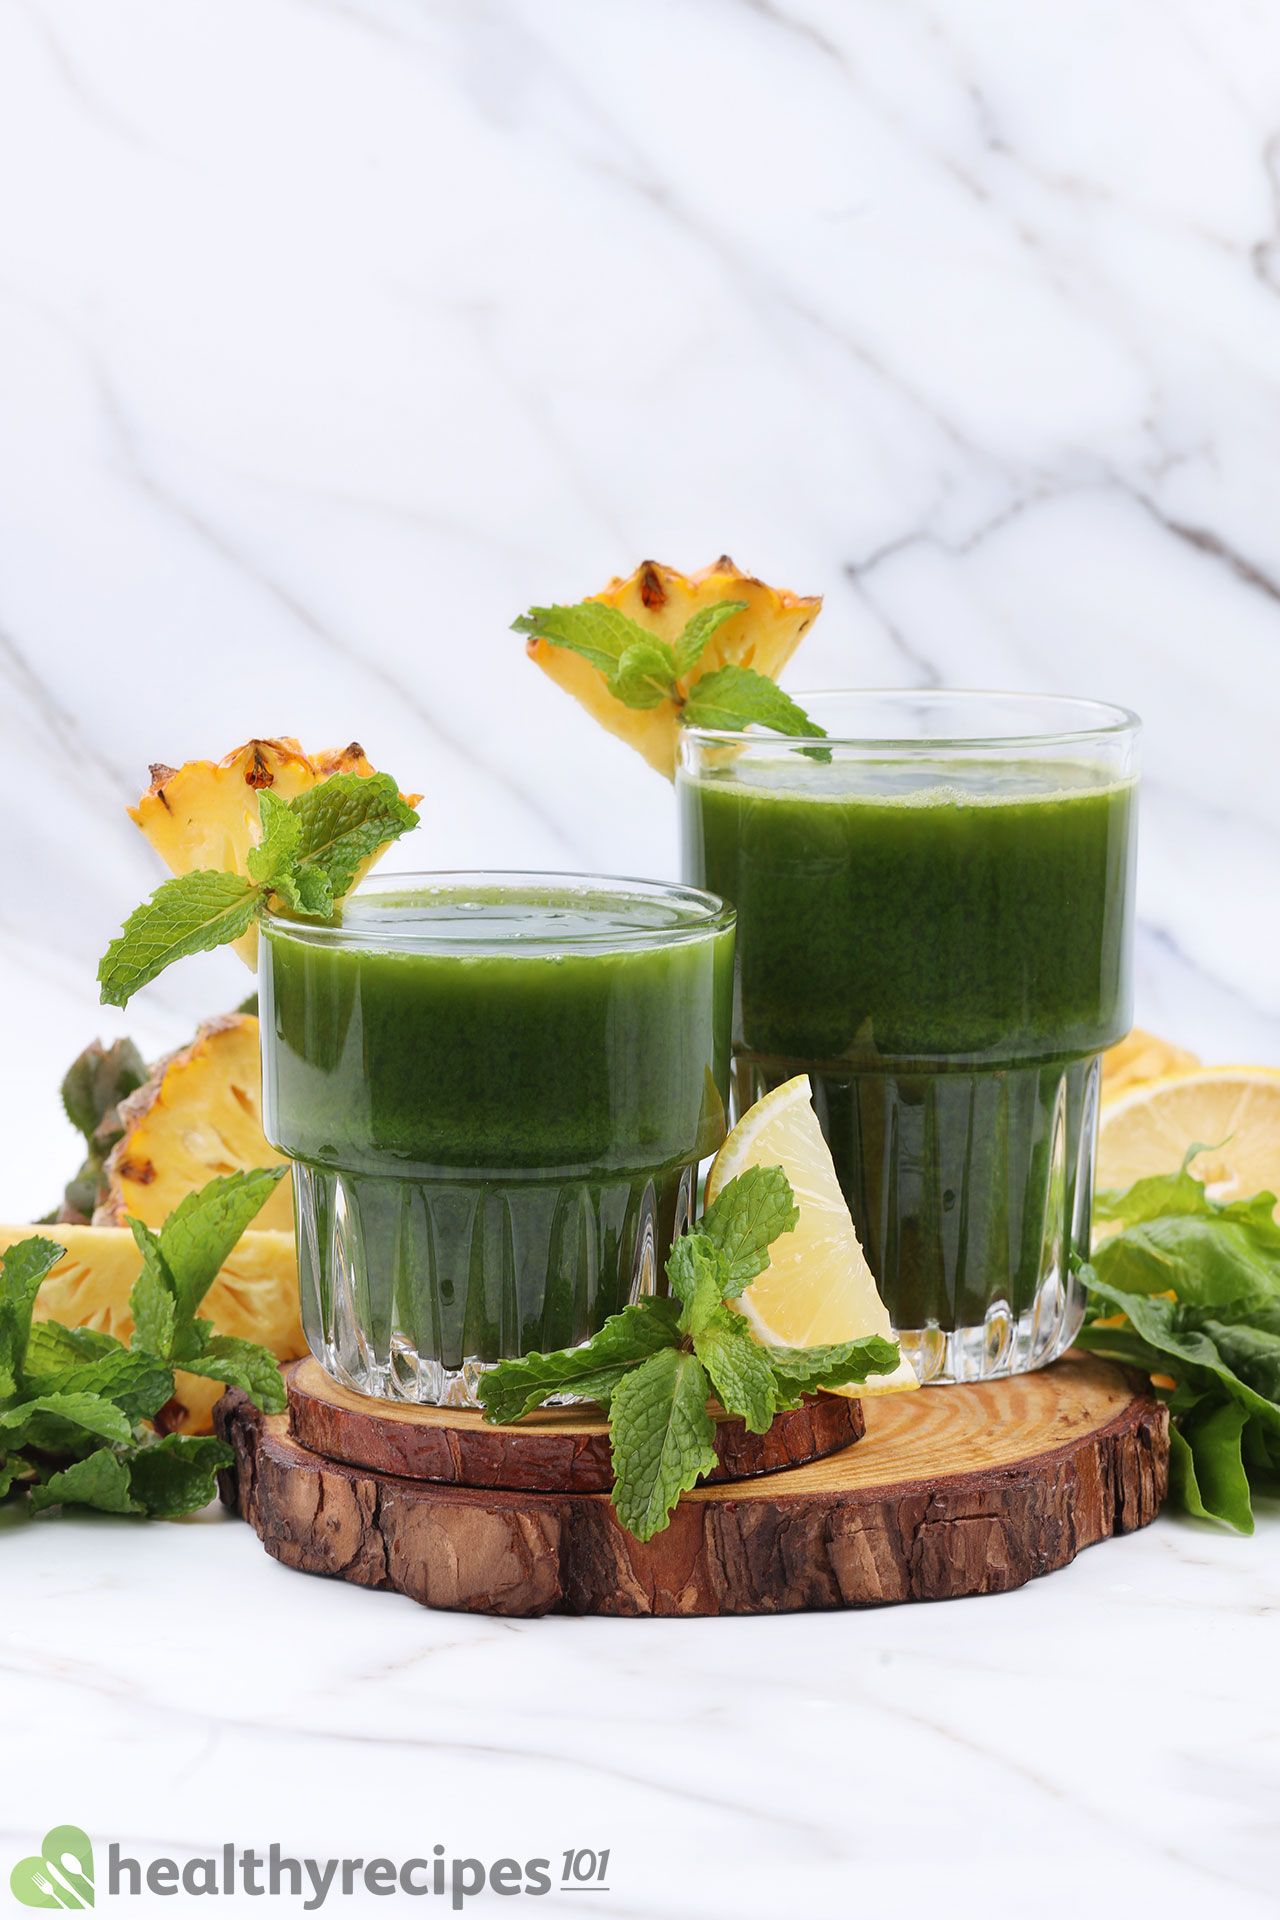 a healthy version with Cucumber, Celery, Spinach, & Kale